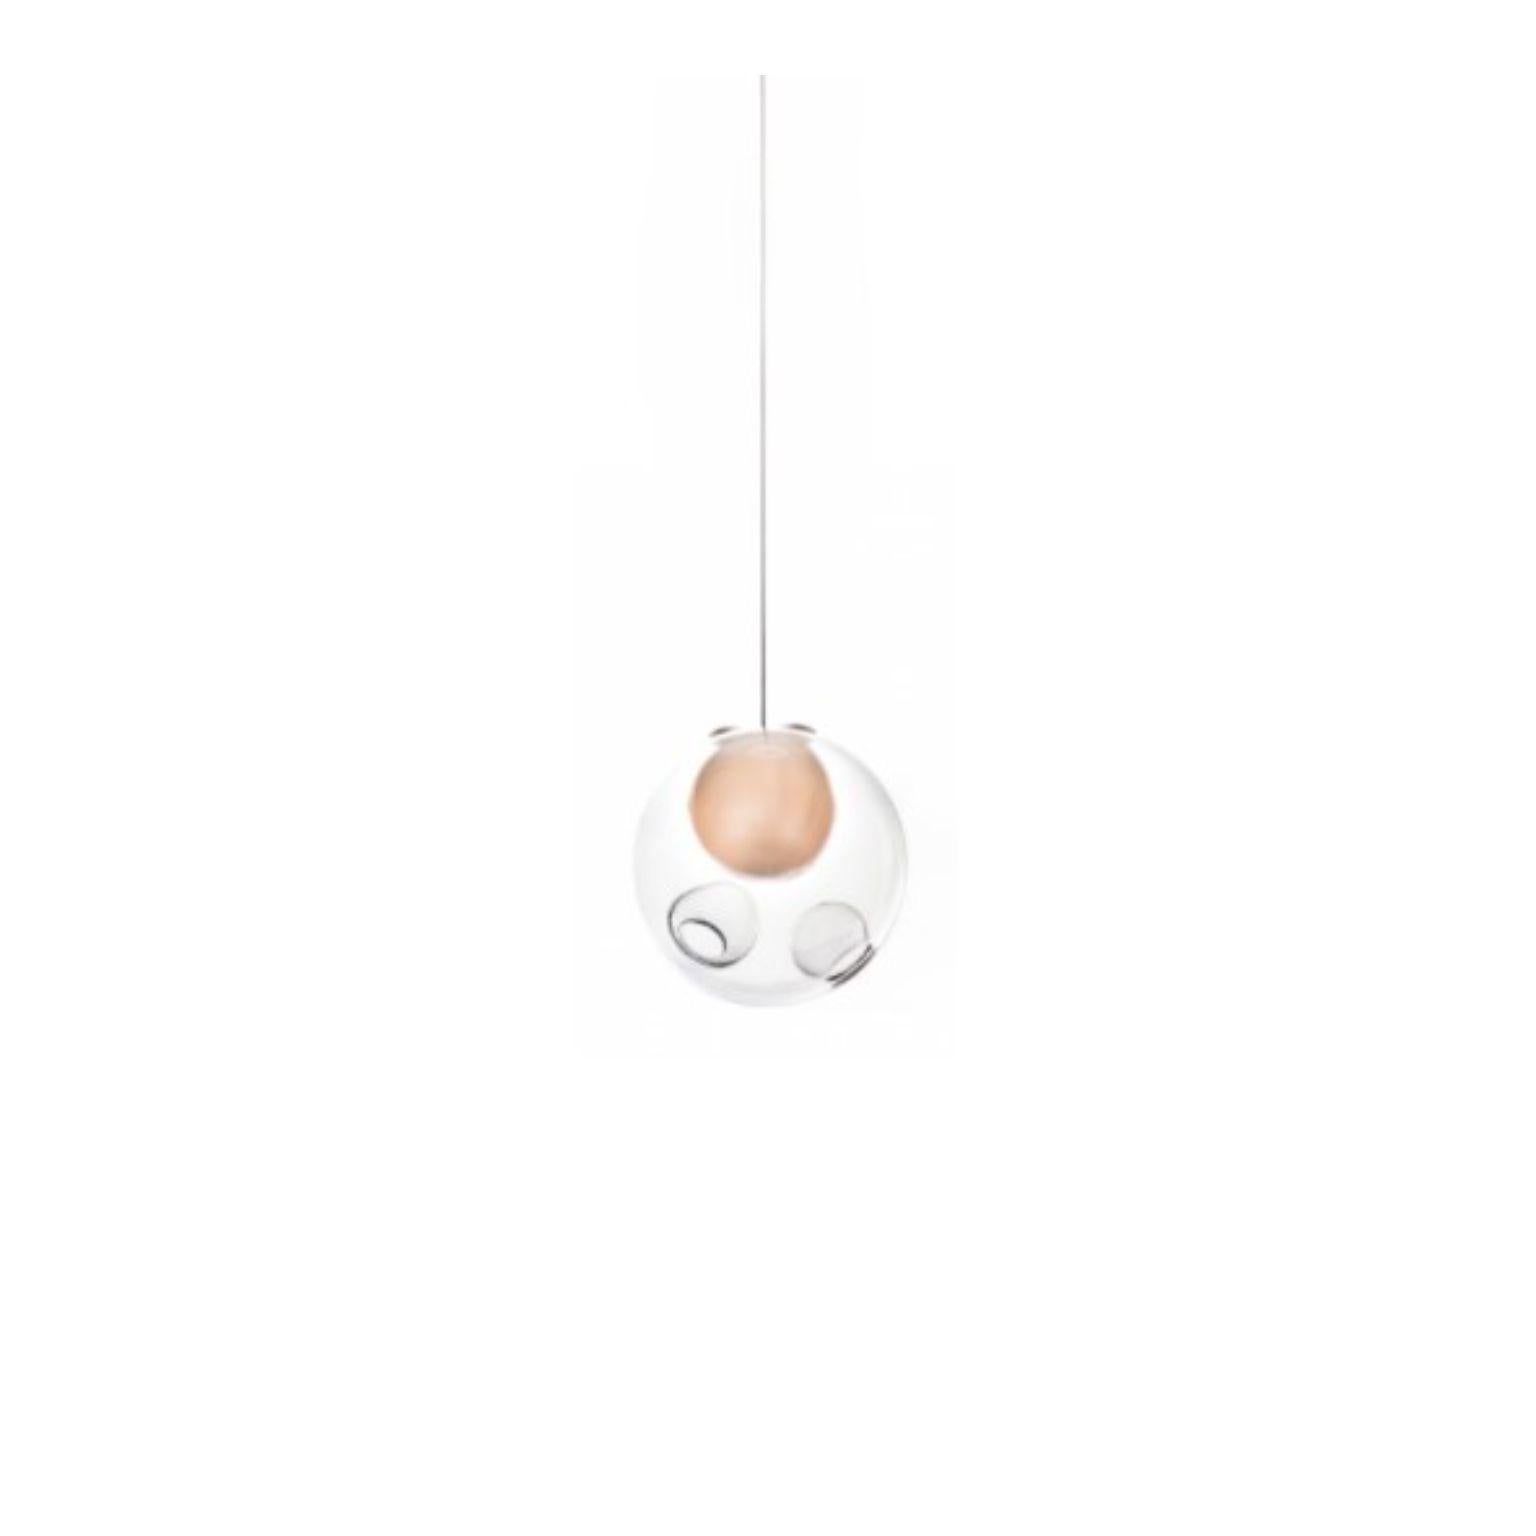 28.1 Pendant by Bocci
Dimensions: D 8.8 x H 300 cm
Materials: diameter brushed nickel canopy
Weight: 1 .1 kg
Also Available in different dimensions

All our lamps can be wired according to each country. If sold to the USA it will be wired for